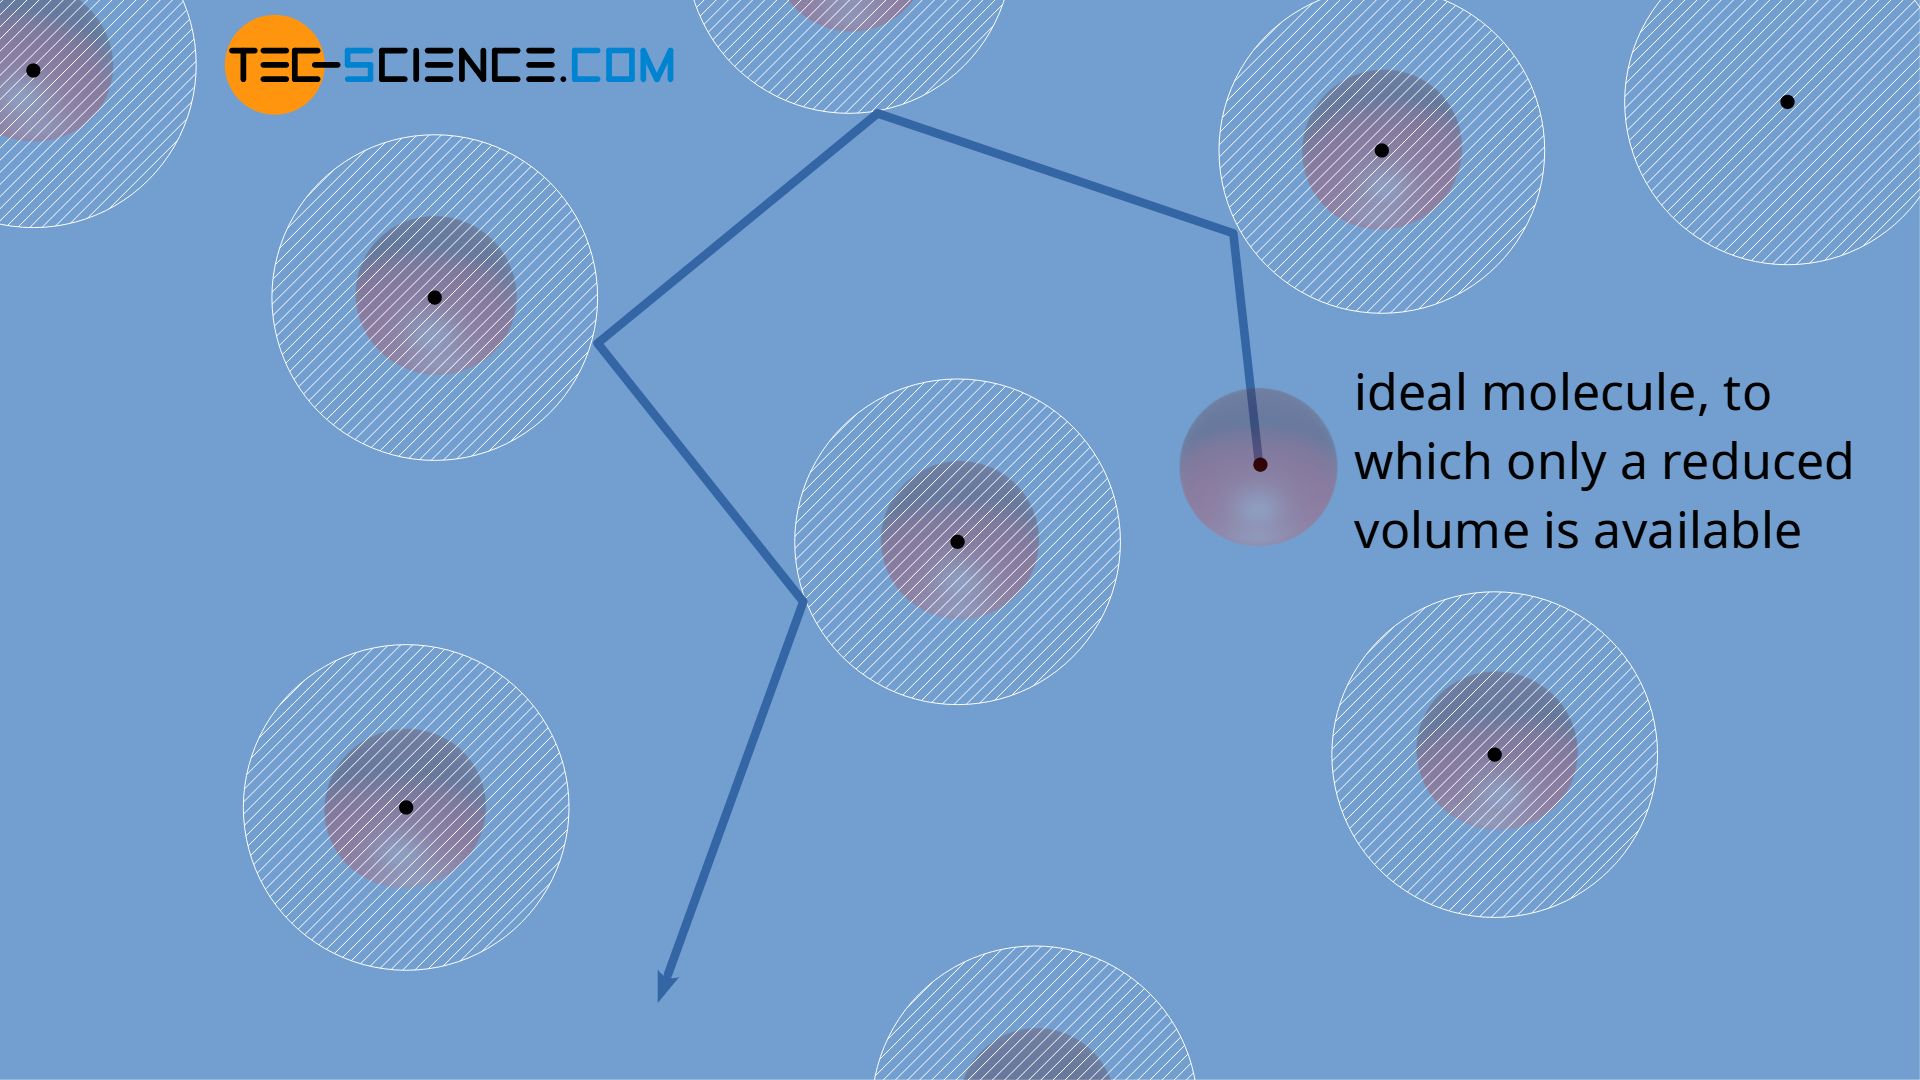 Ideal molecule, to which only a reduced volume is available